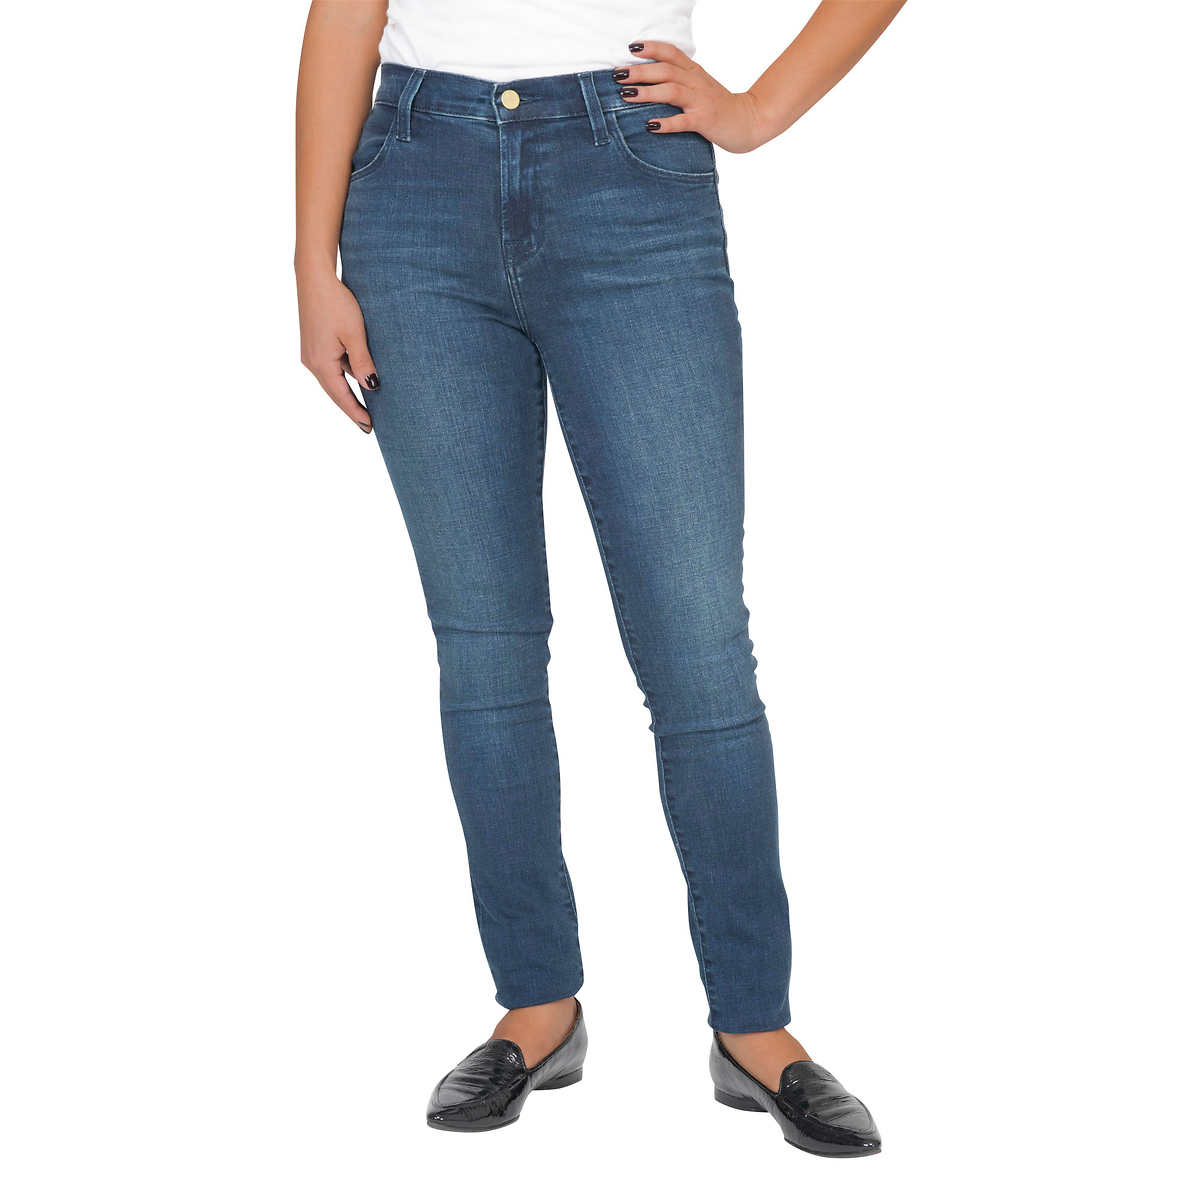 Second Life Marketplace - Froth Carrie Super Low Rise Jeans with